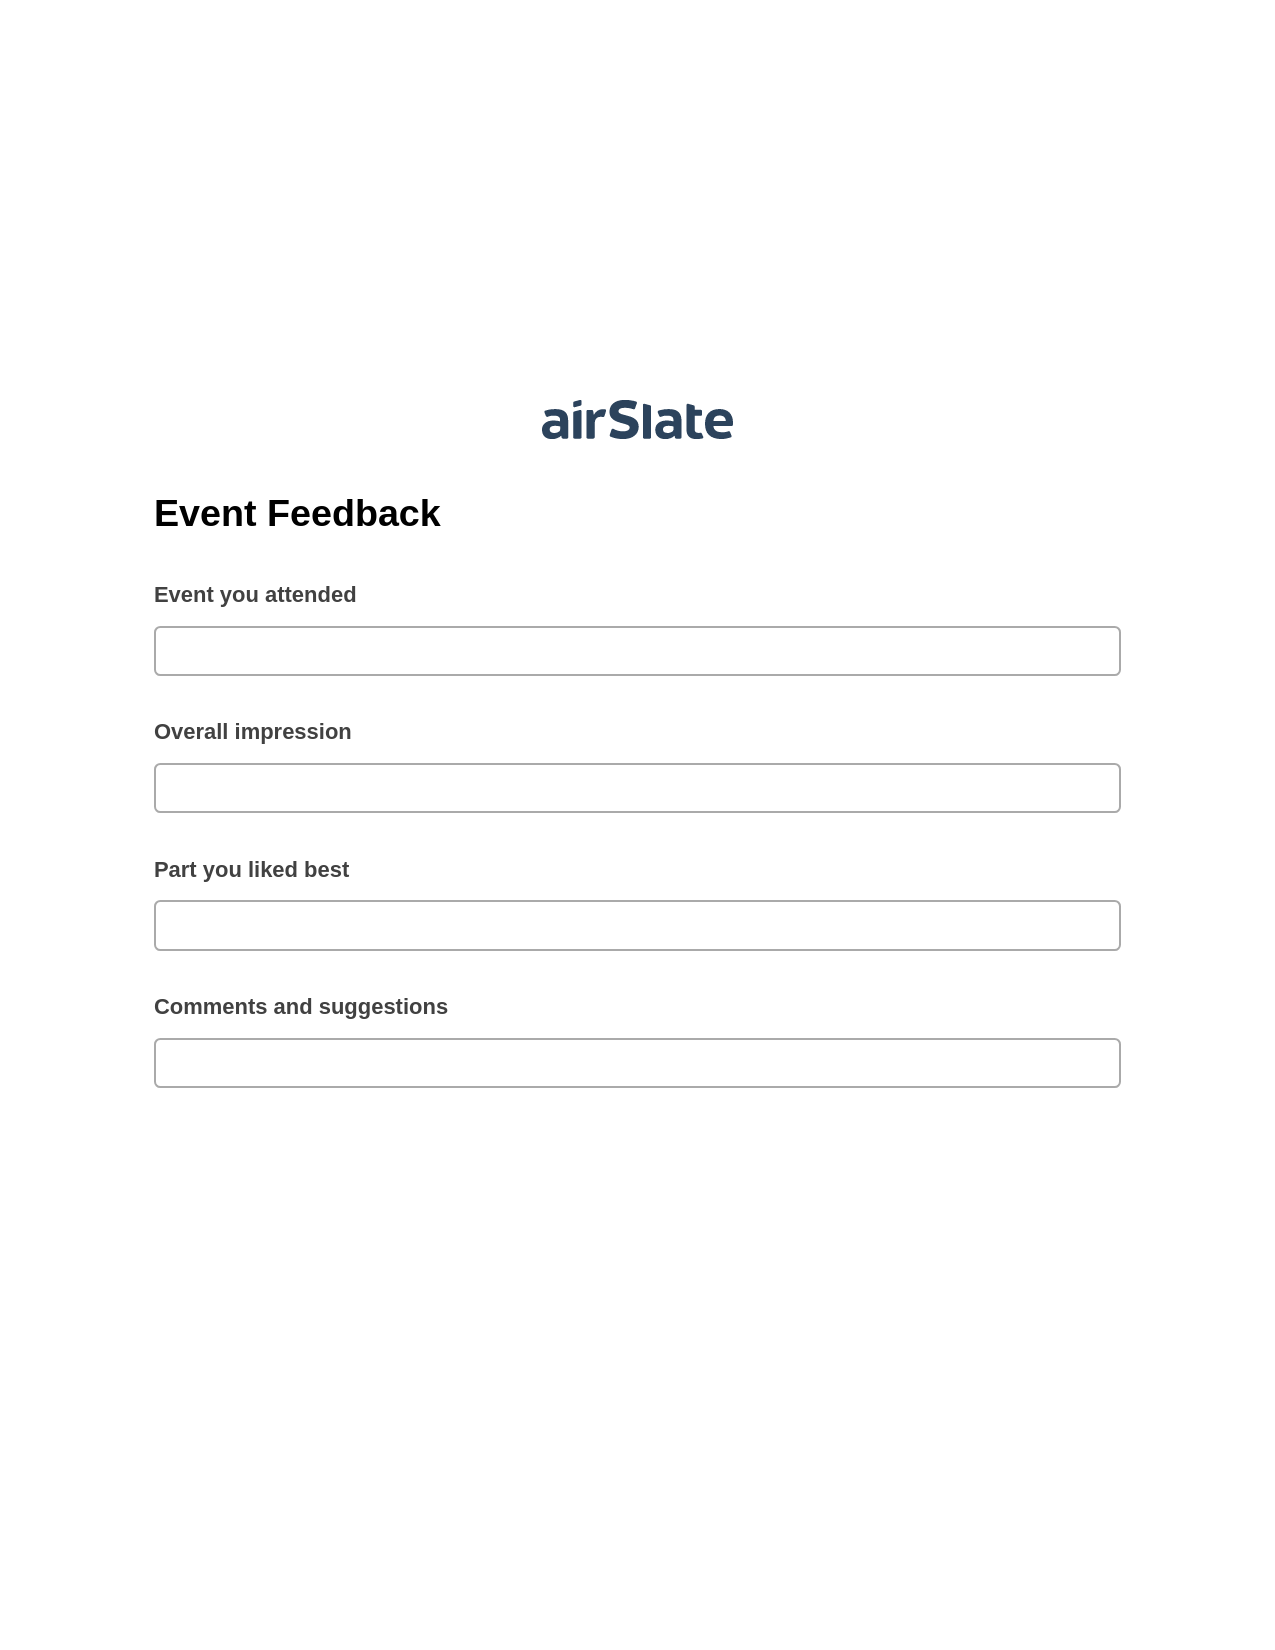 Event Feedback Pre-fill from Salesforce Record Bot, Create slate bot, Archive to SharePoint Folder Bot